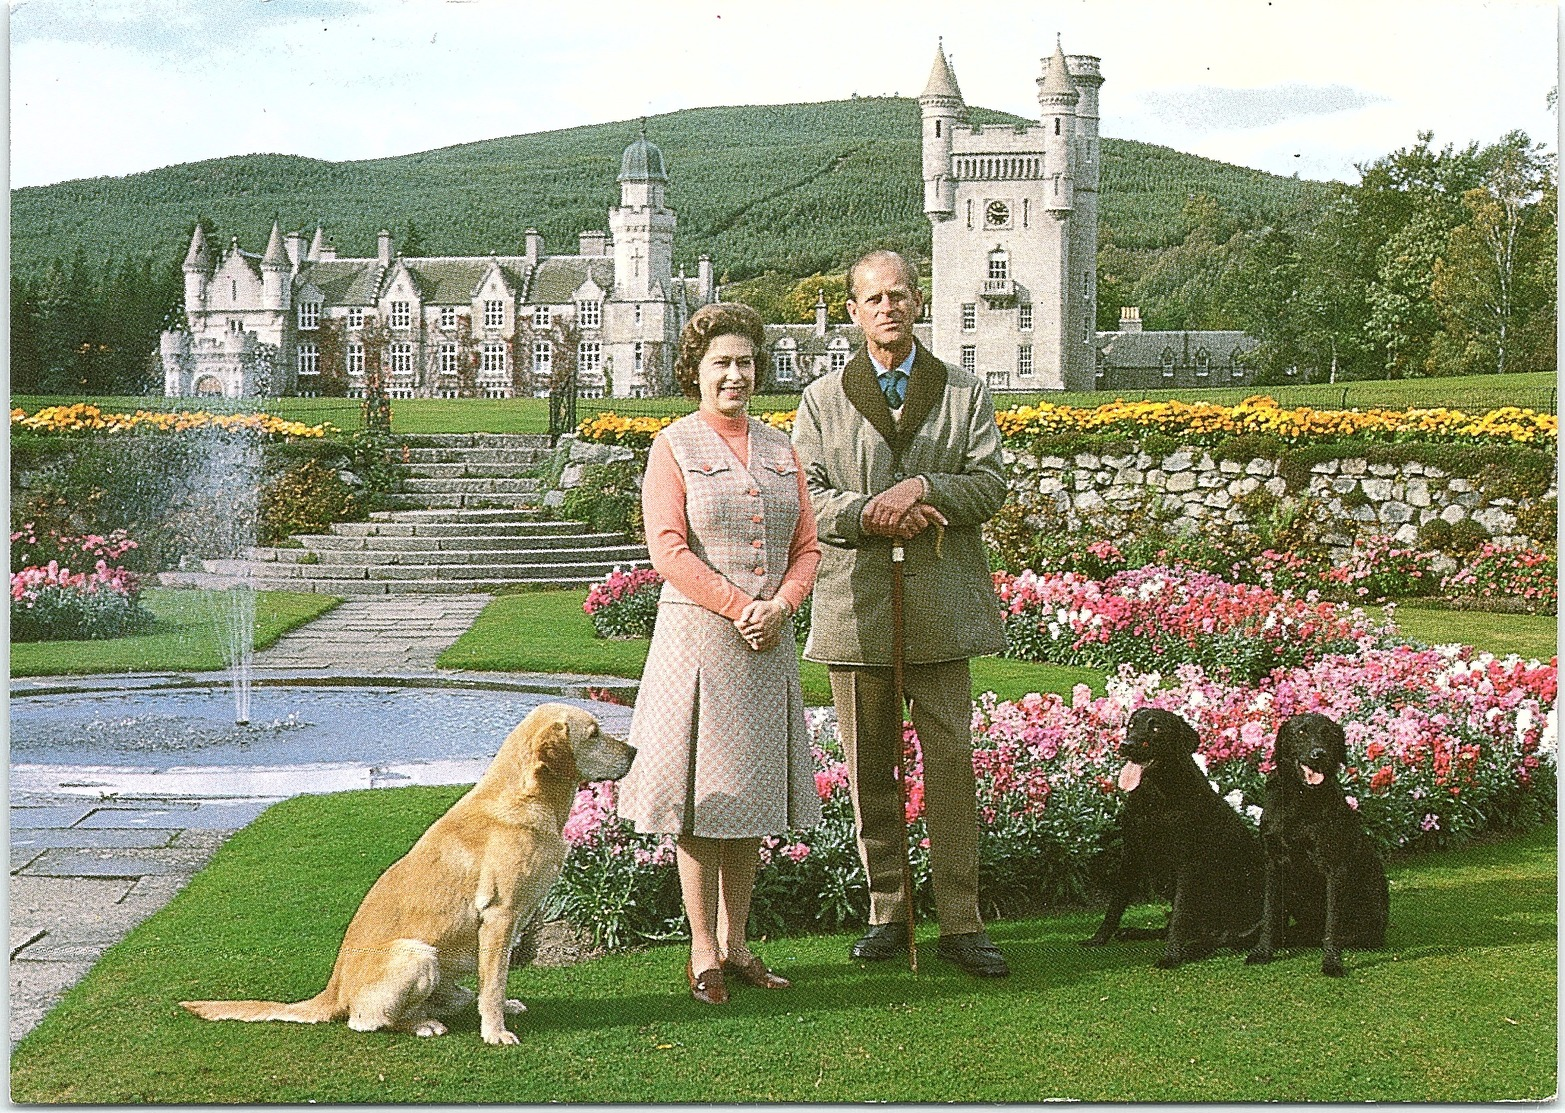 H.M. The Queen And H.R.H. The Duke Of Edinburgh In The Gardens Of Balmoral Castle - Case Reali